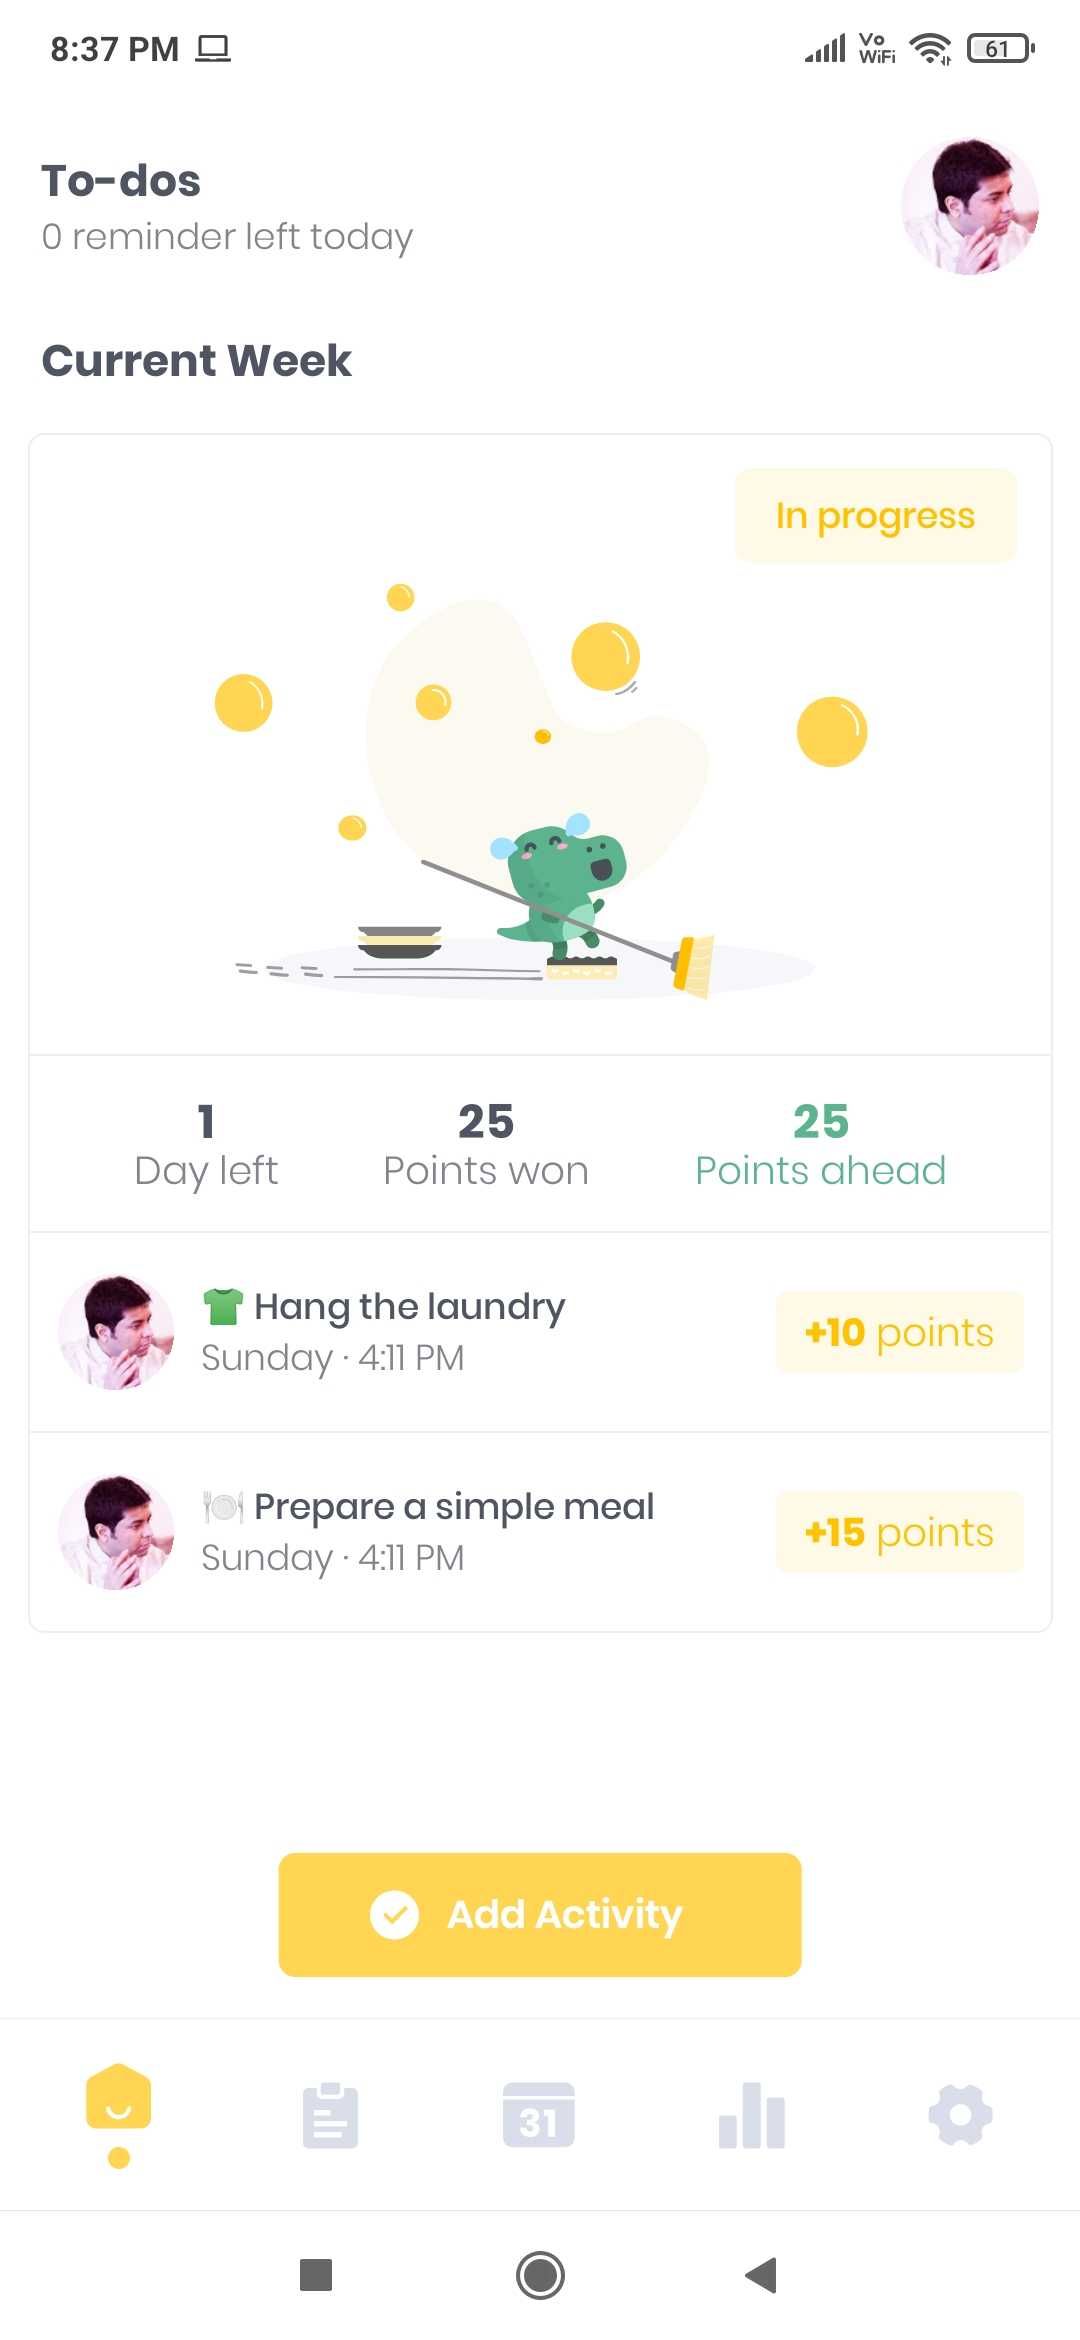 Nipto tracks which tasks you finished and gives you points for them